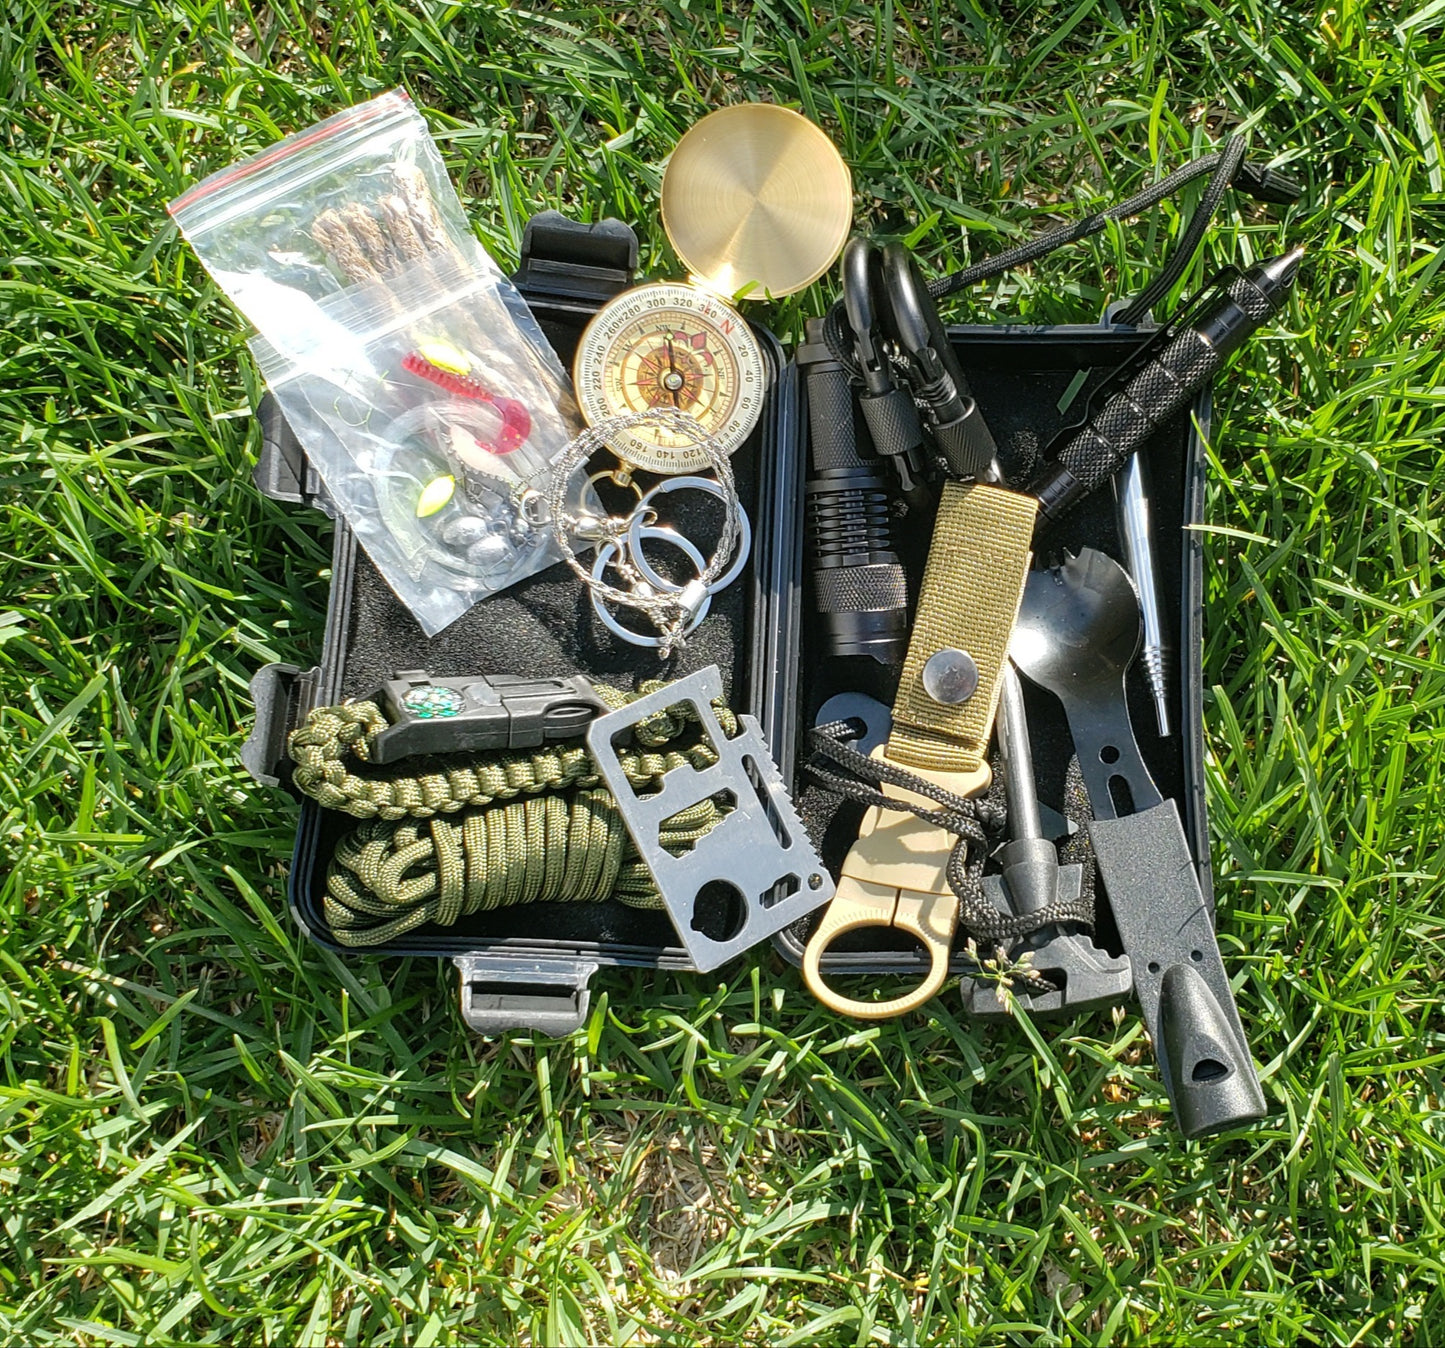 Backcountry Camping / Airplane Survival Kit - Custom Build